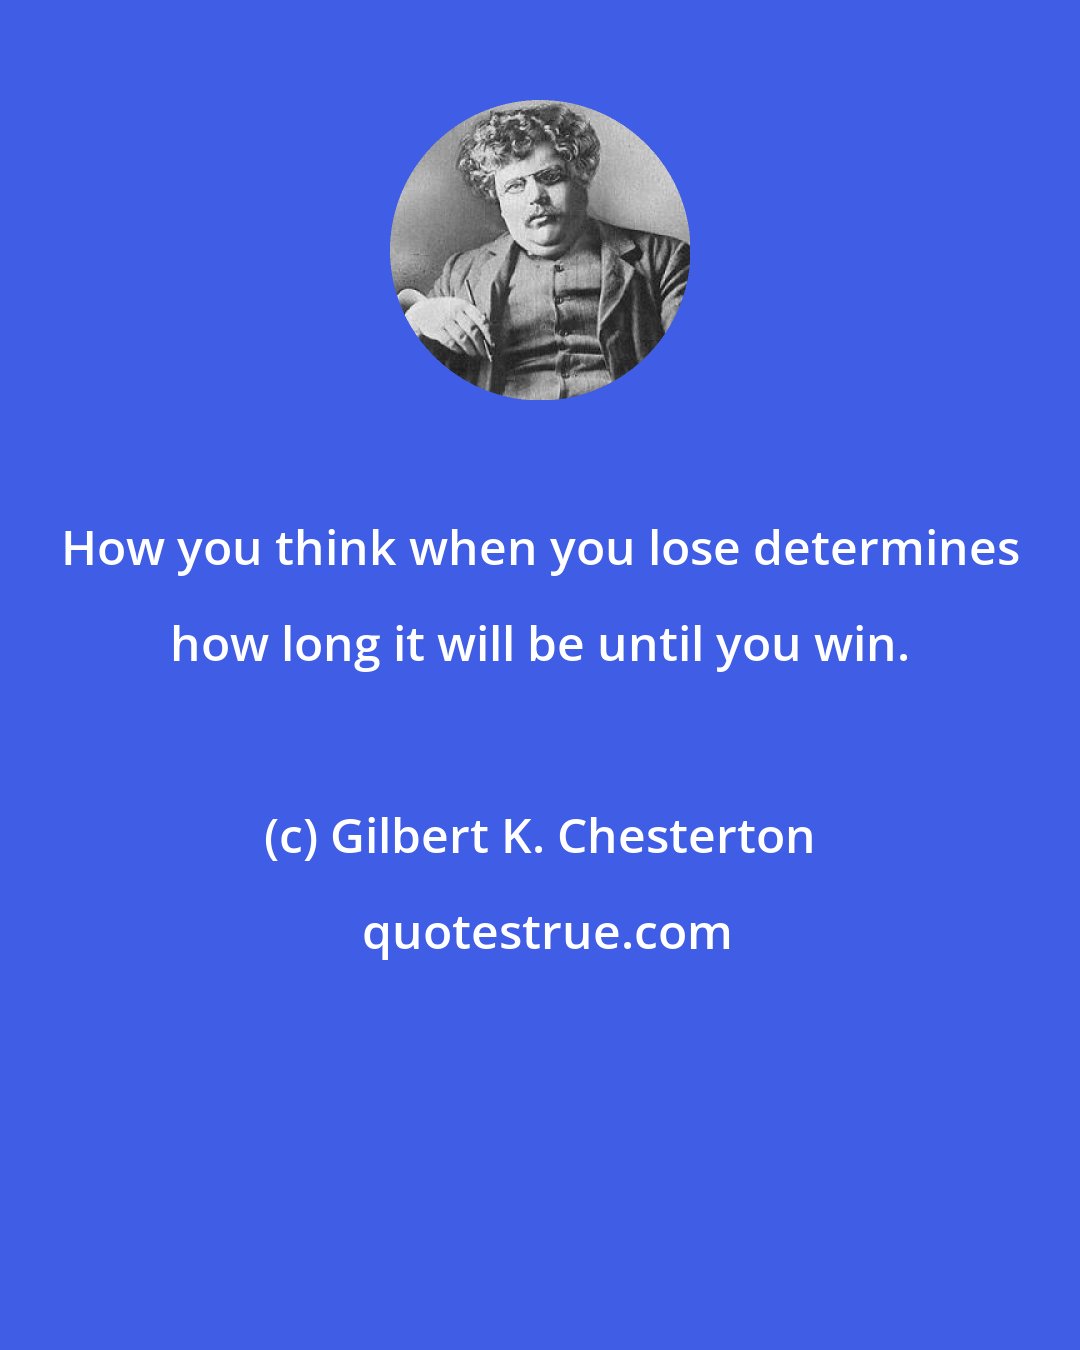 Gilbert K. Chesterton: How you think when you lose determines how long it will be until you win.